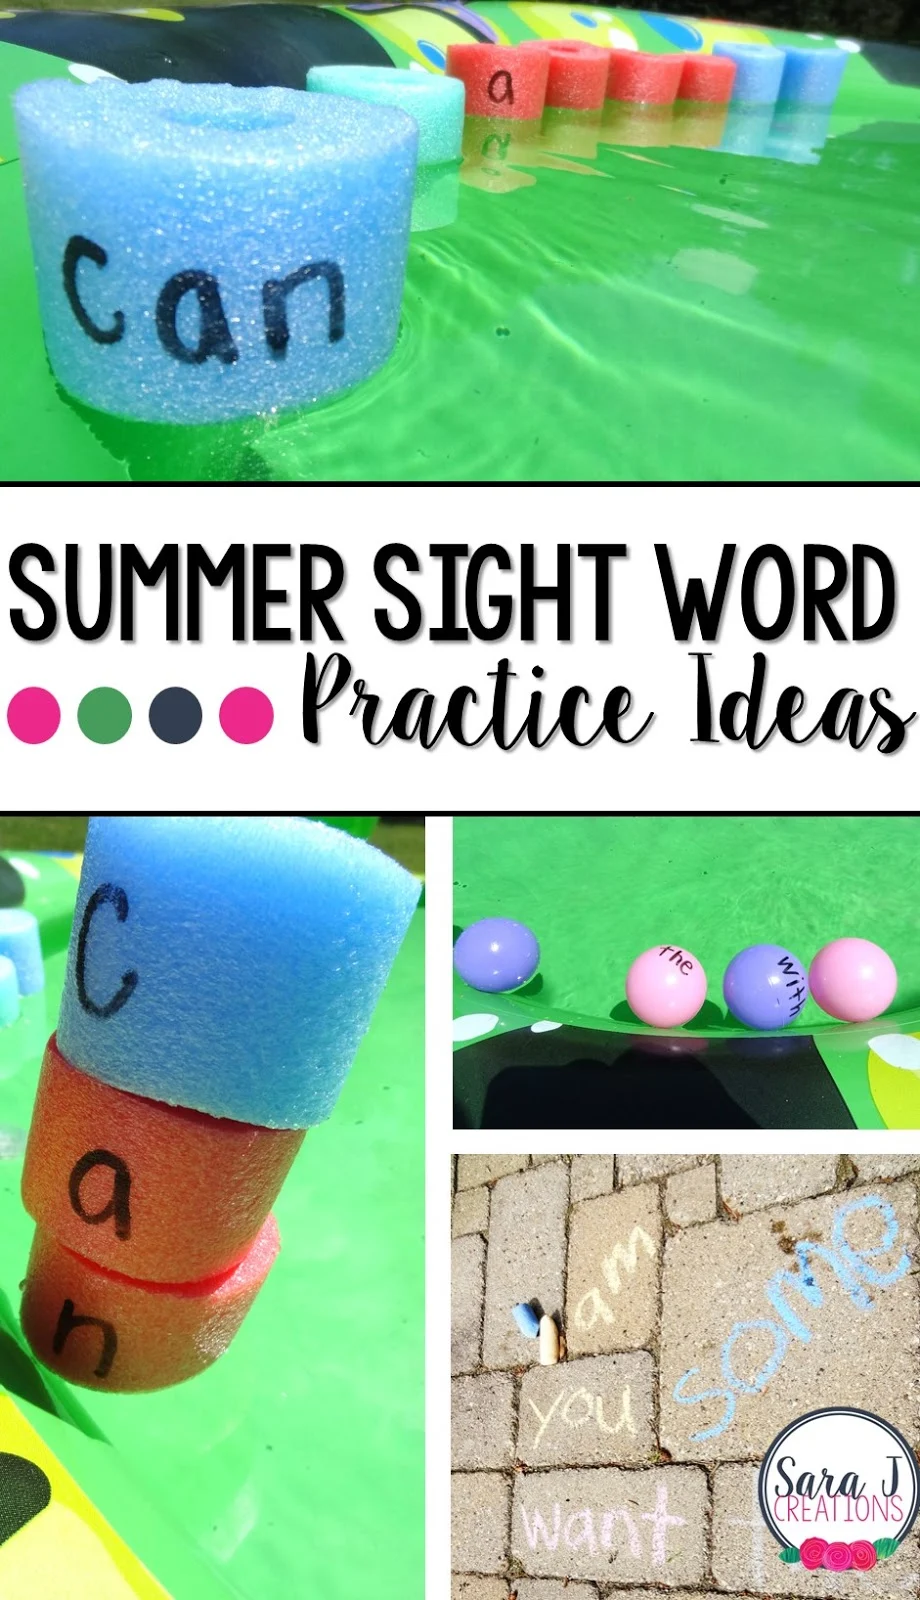 Here are 3 easy ways to make practicing sight words fun, hands on and best of all, an outside activity!  You can do these in the classroom/playground or at home.